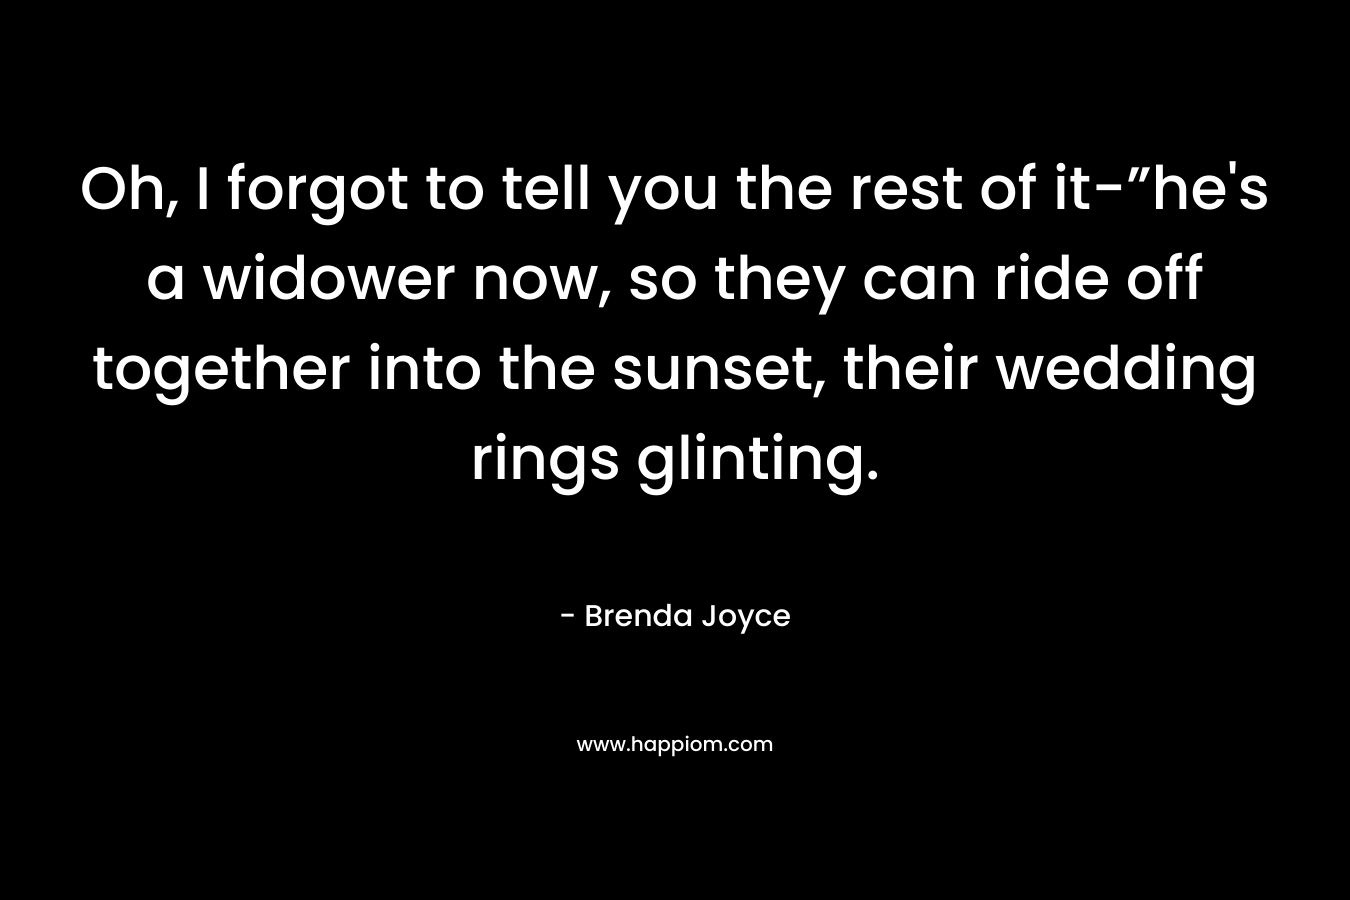 Oh, I forgot to tell you the rest of it-”he’s a widower now, so they can ride off together into the sunset, their wedding rings glinting. – Brenda Joyce